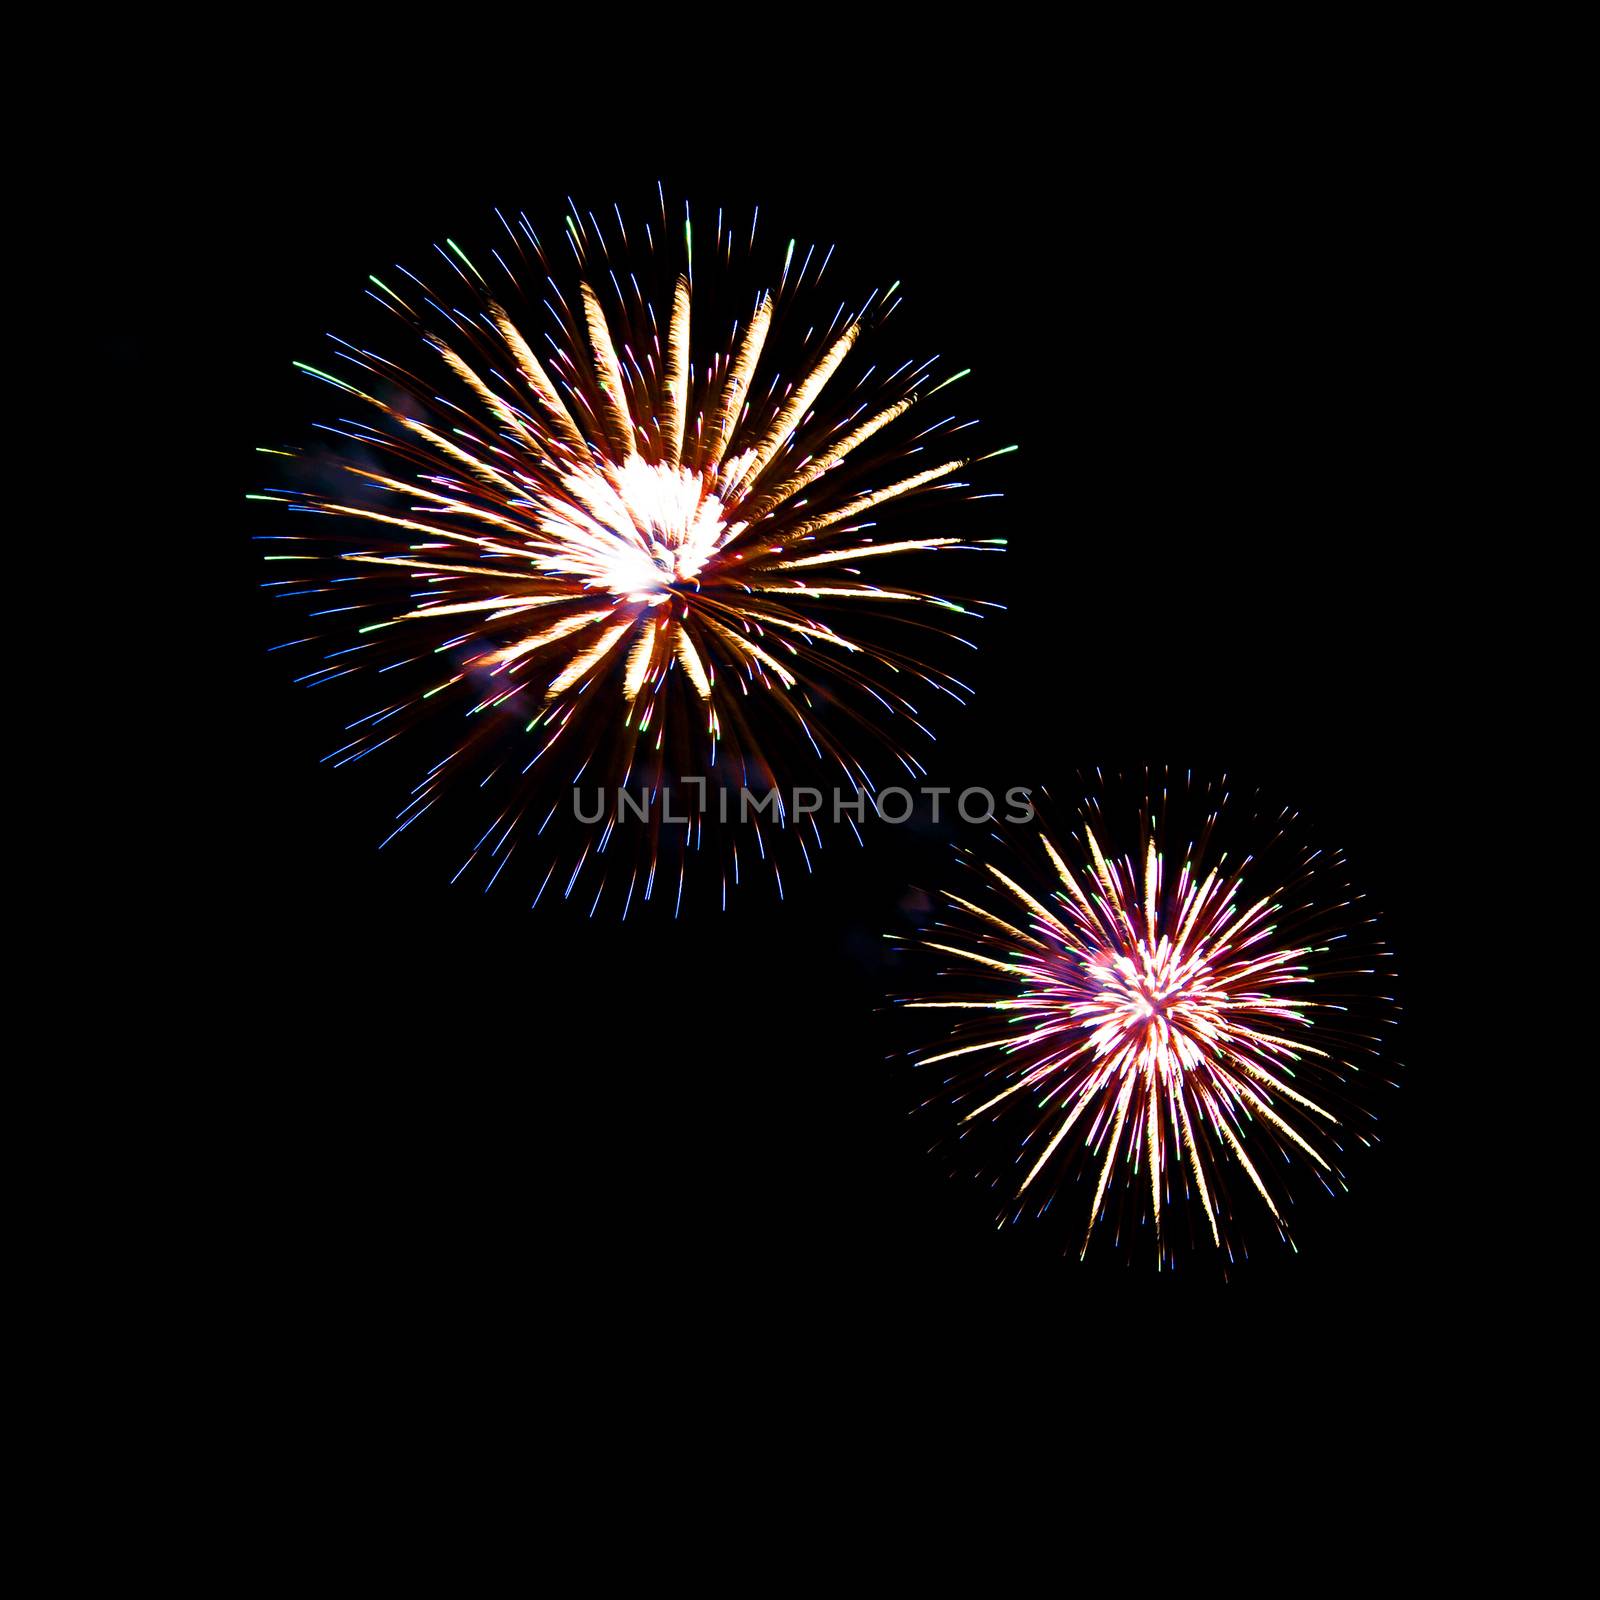 Fireworks by gutarphotoghaphy